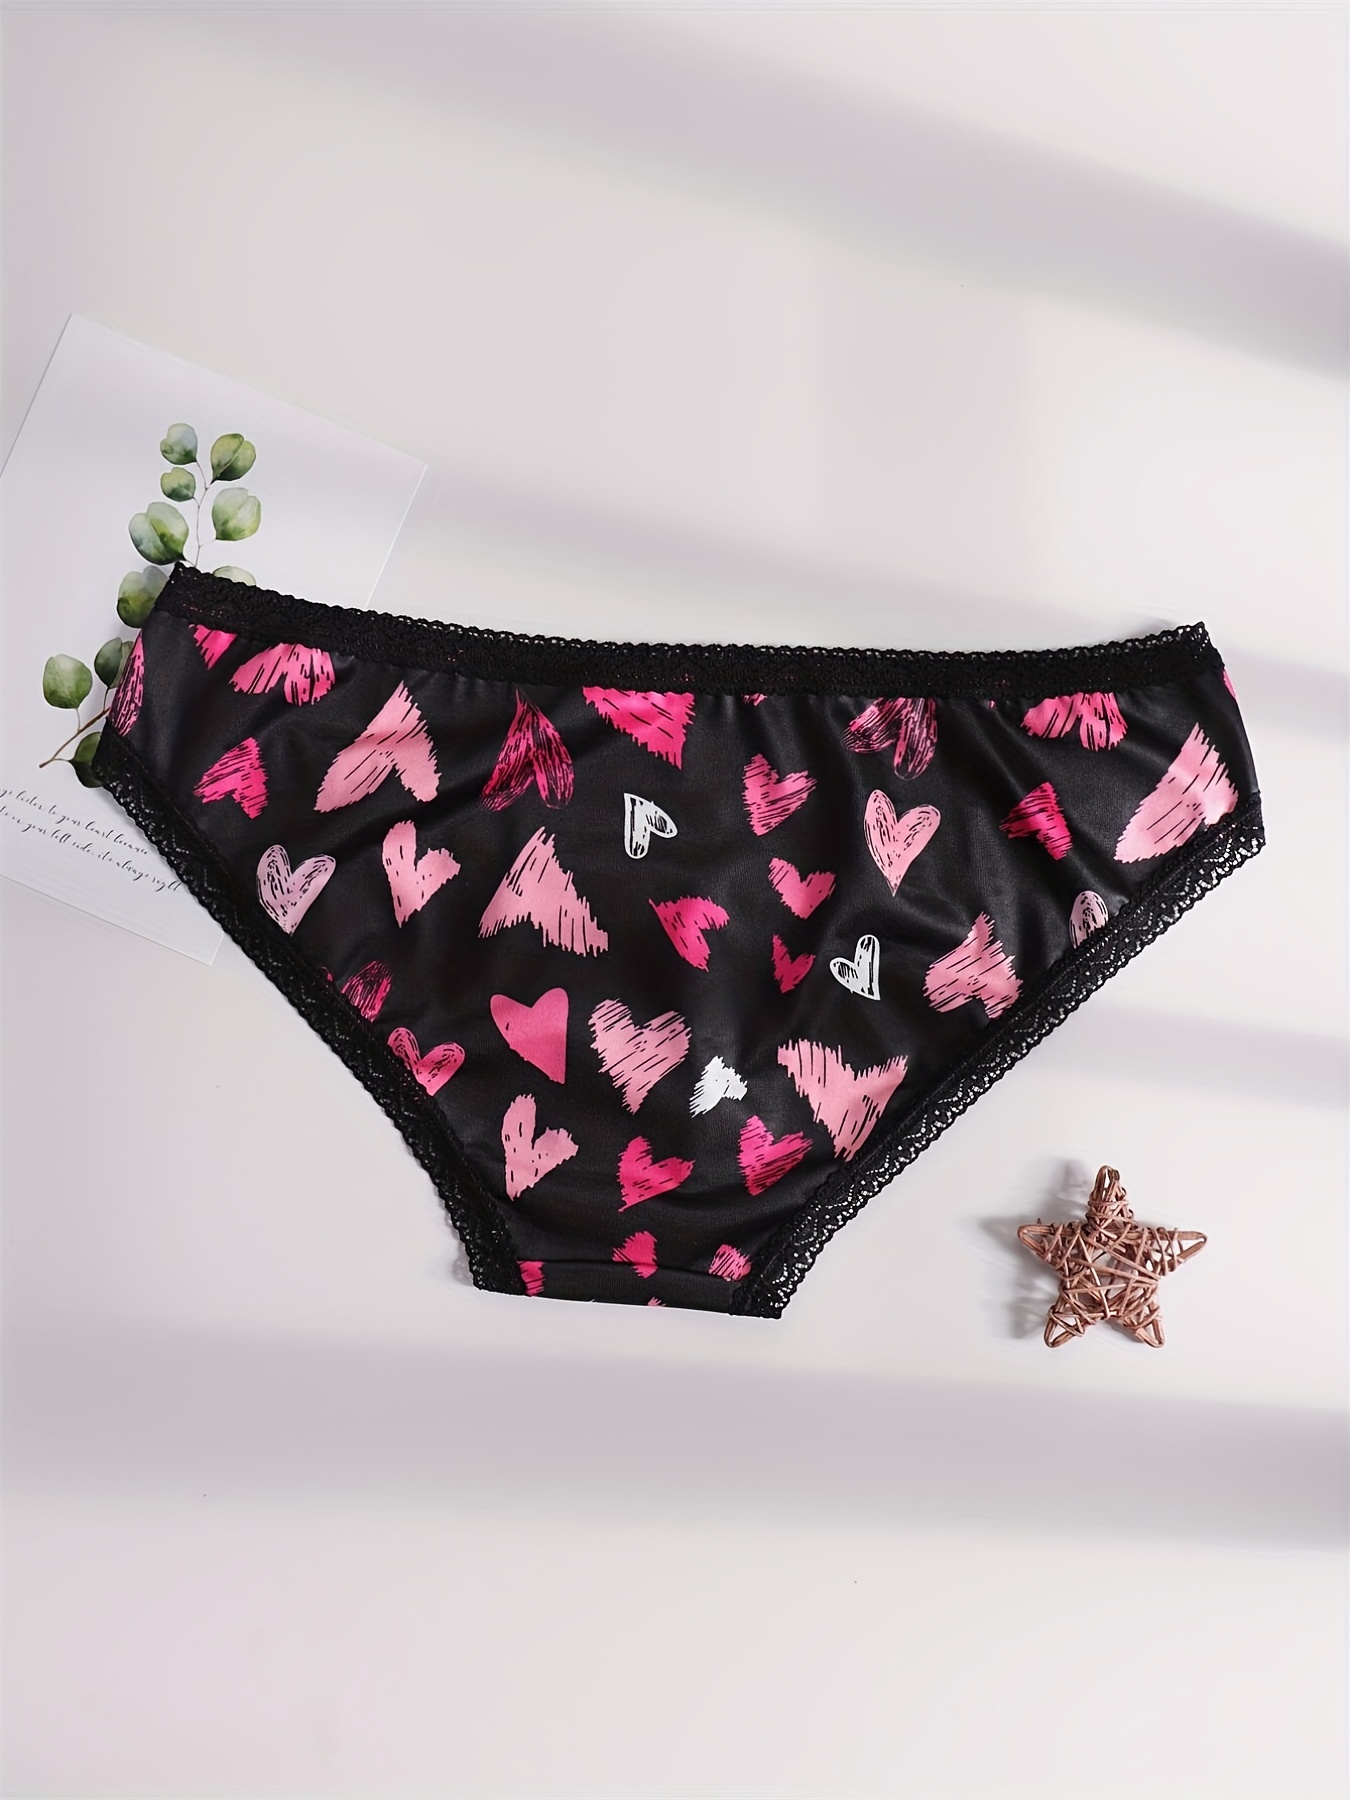 BHS Pink Lace Trim Heart Print Knickers. Size 10